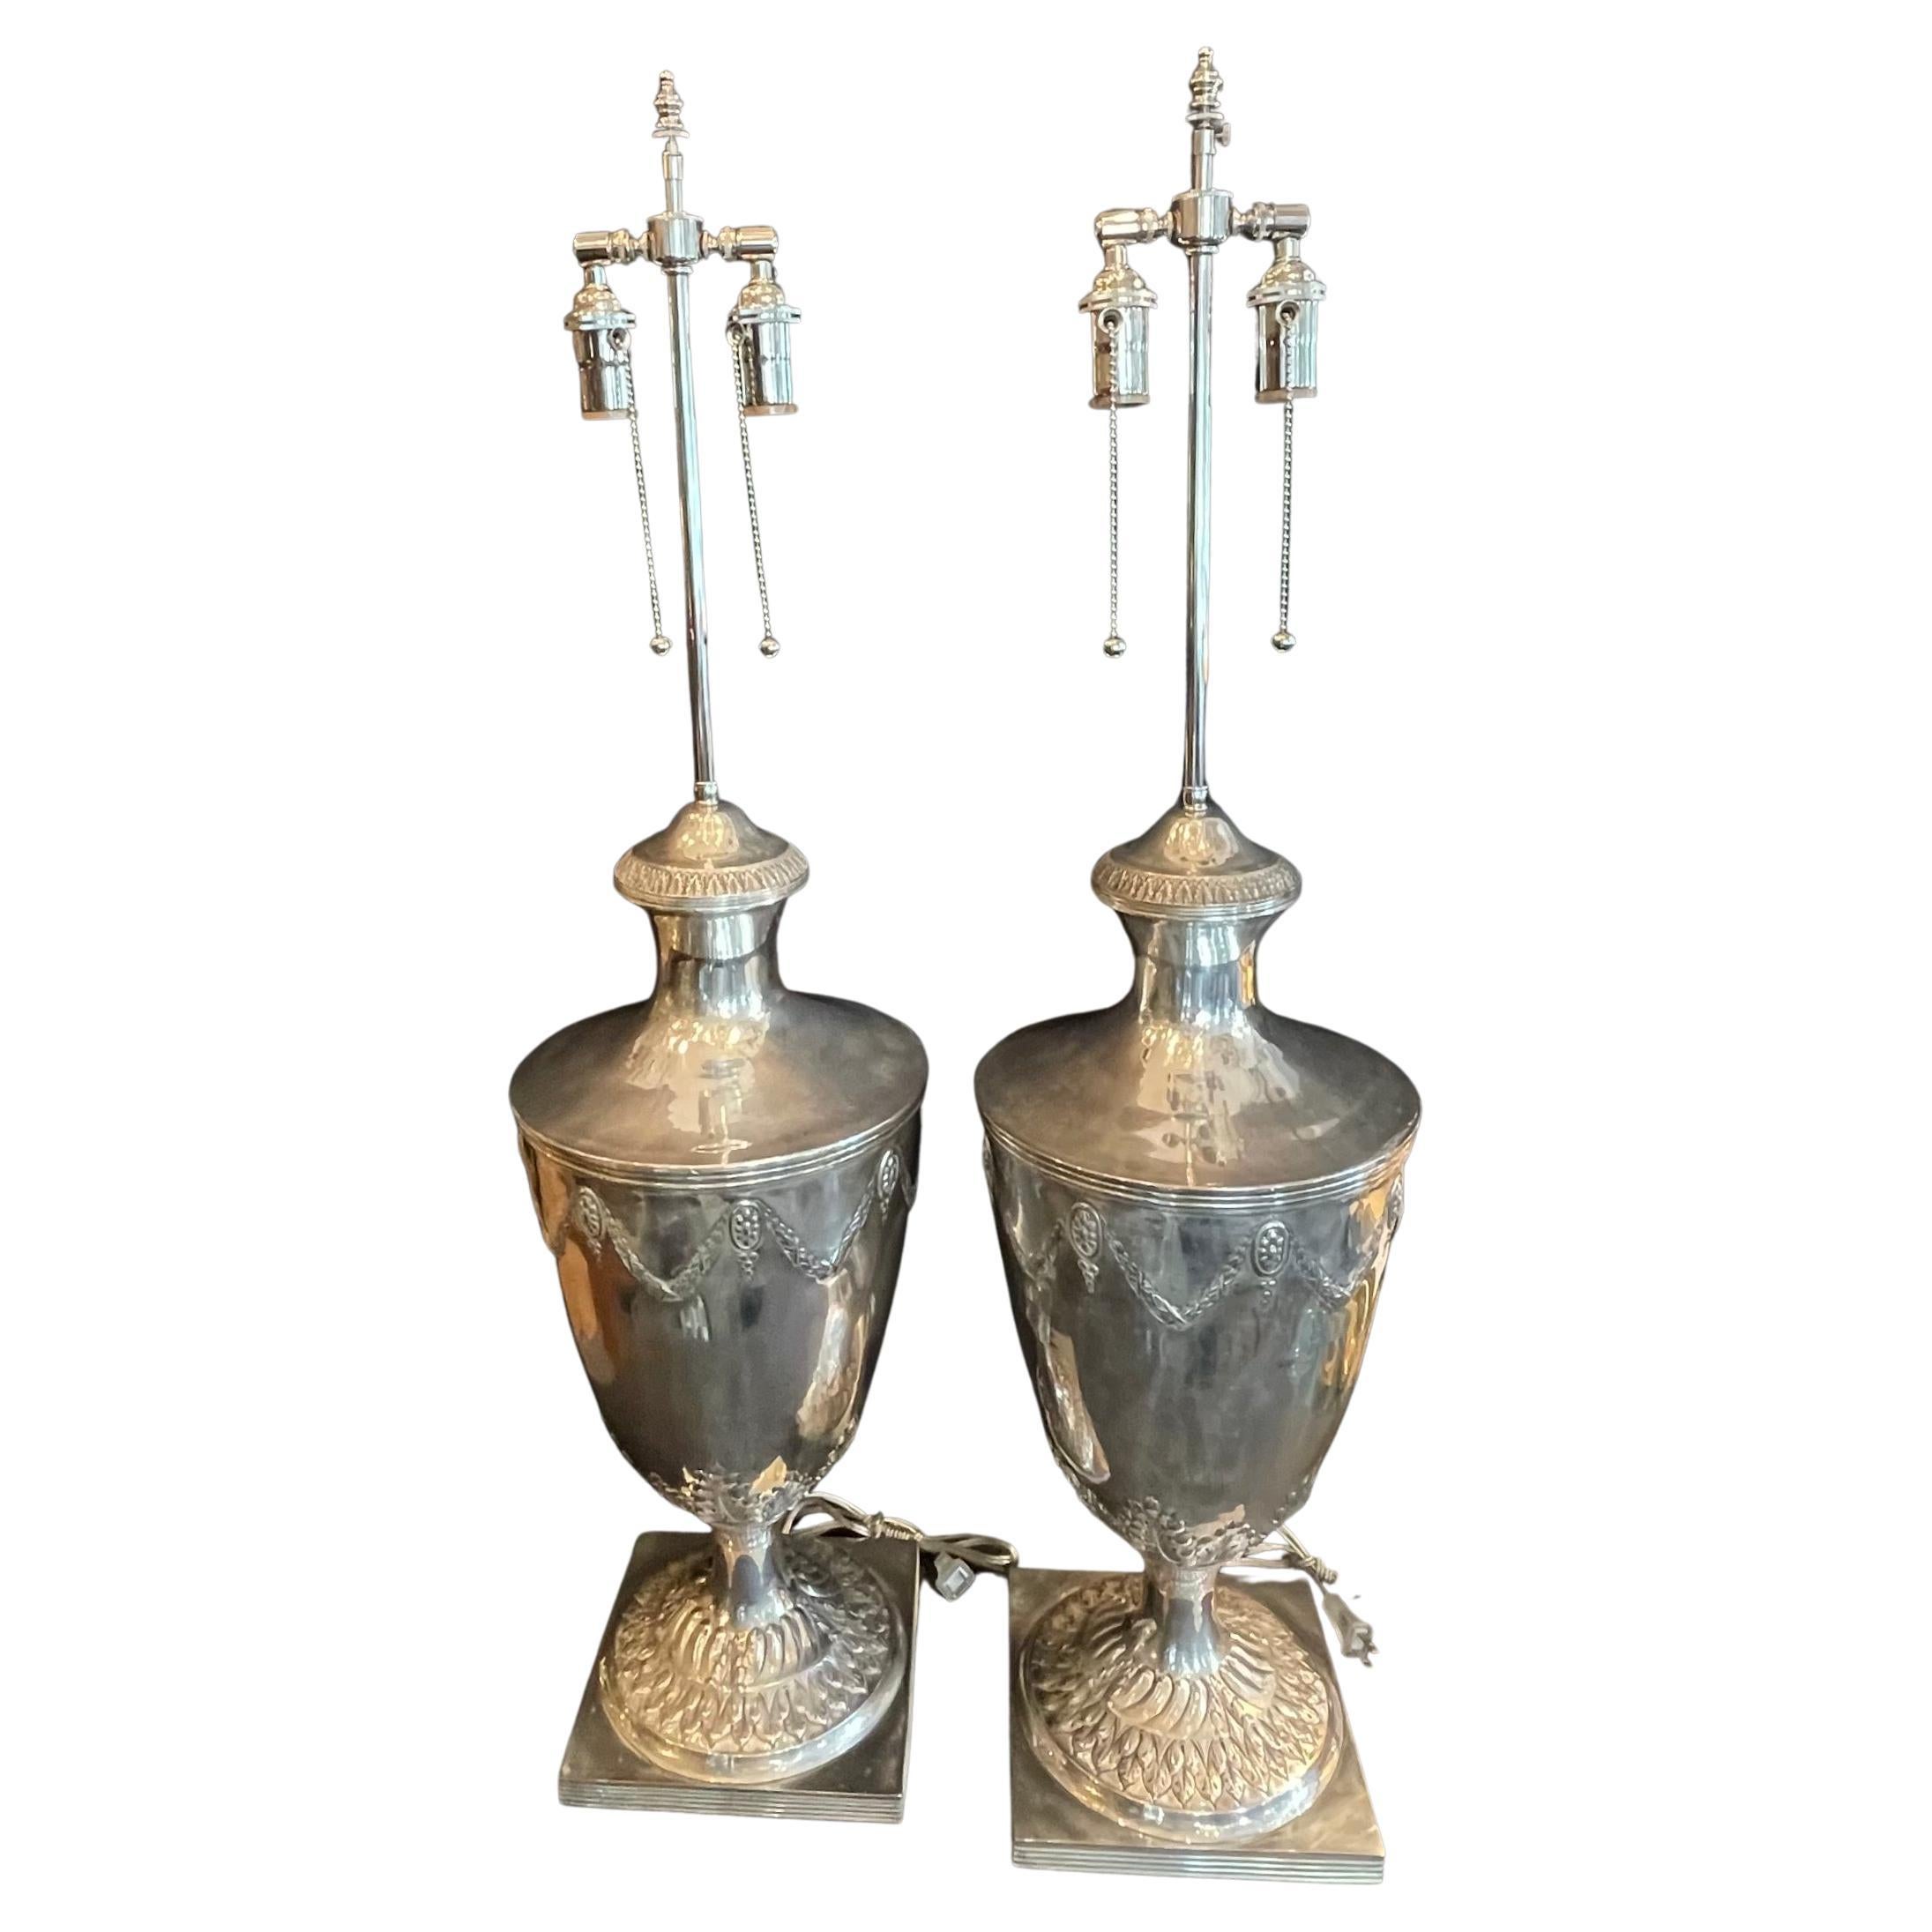 A Wonderful Large Antique English Pair Of Sheffield Silver Plated Edwardian Style Urn Form Lamps In The Manner Of Ralph Lauren.
Completely Rewired With New Sockets

*They Maybe Converted Back To Urns At No Charge Upon Request.